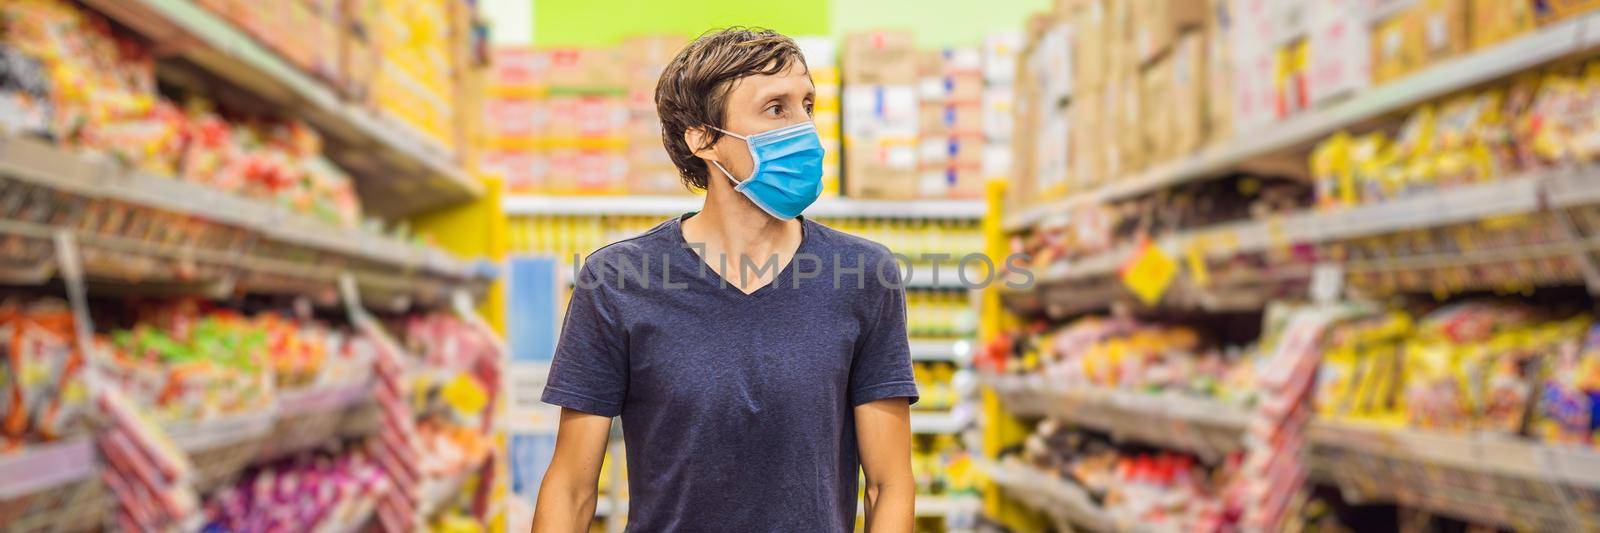 Alarmed man wears medical mask against coronavirus while grocery shopping in supermarket or store- health, safety and pandemic concept - young woman wearing protective mask and stockpiling food BANNER, LONG FORMAT by galitskaya